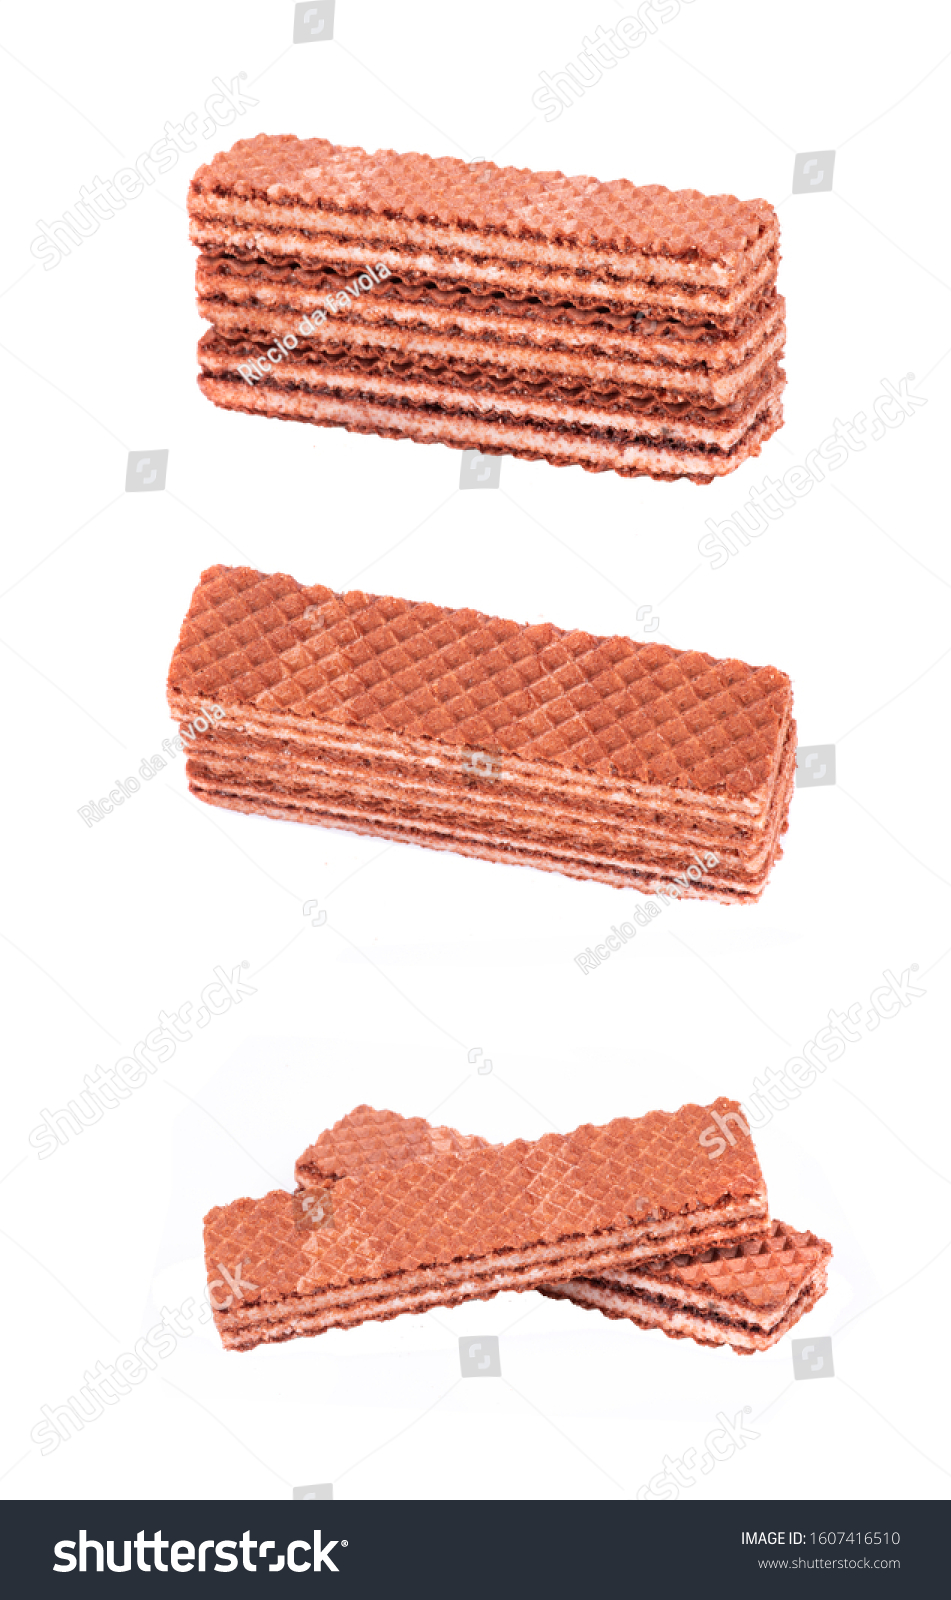 Chocolate wafers with white filling in different angles and from different angles are isolated on a white background #1607416510